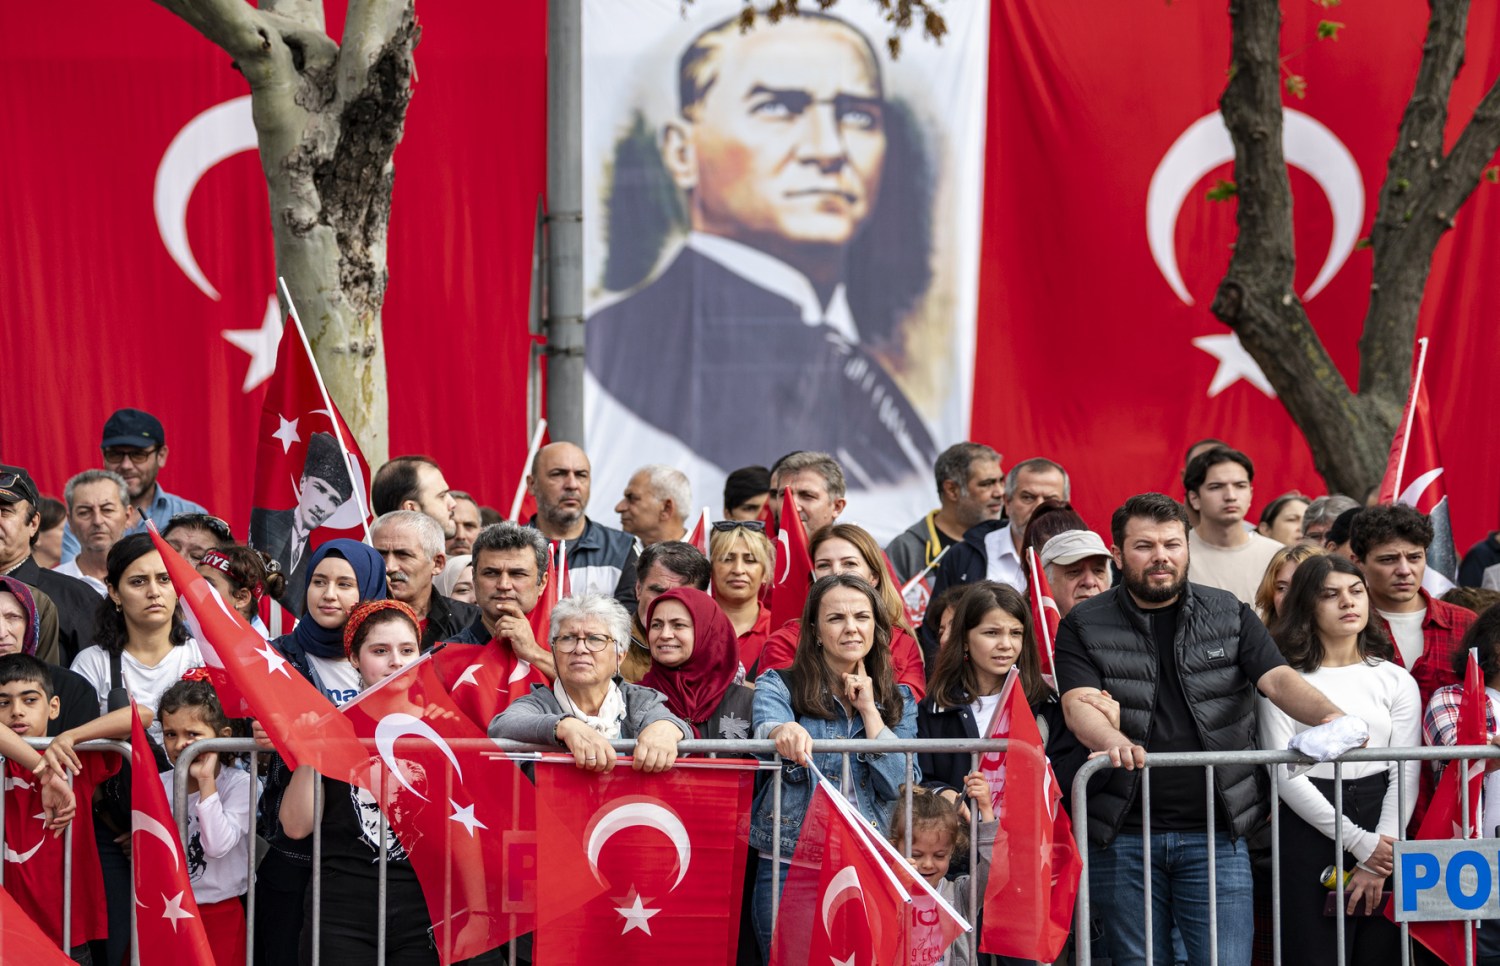 People watching demonstrations in Istanbul on Sunday, October 29, 2023, as part of the celebrations for the centenary anniversary of the founding of the secular Republic of Turkey.